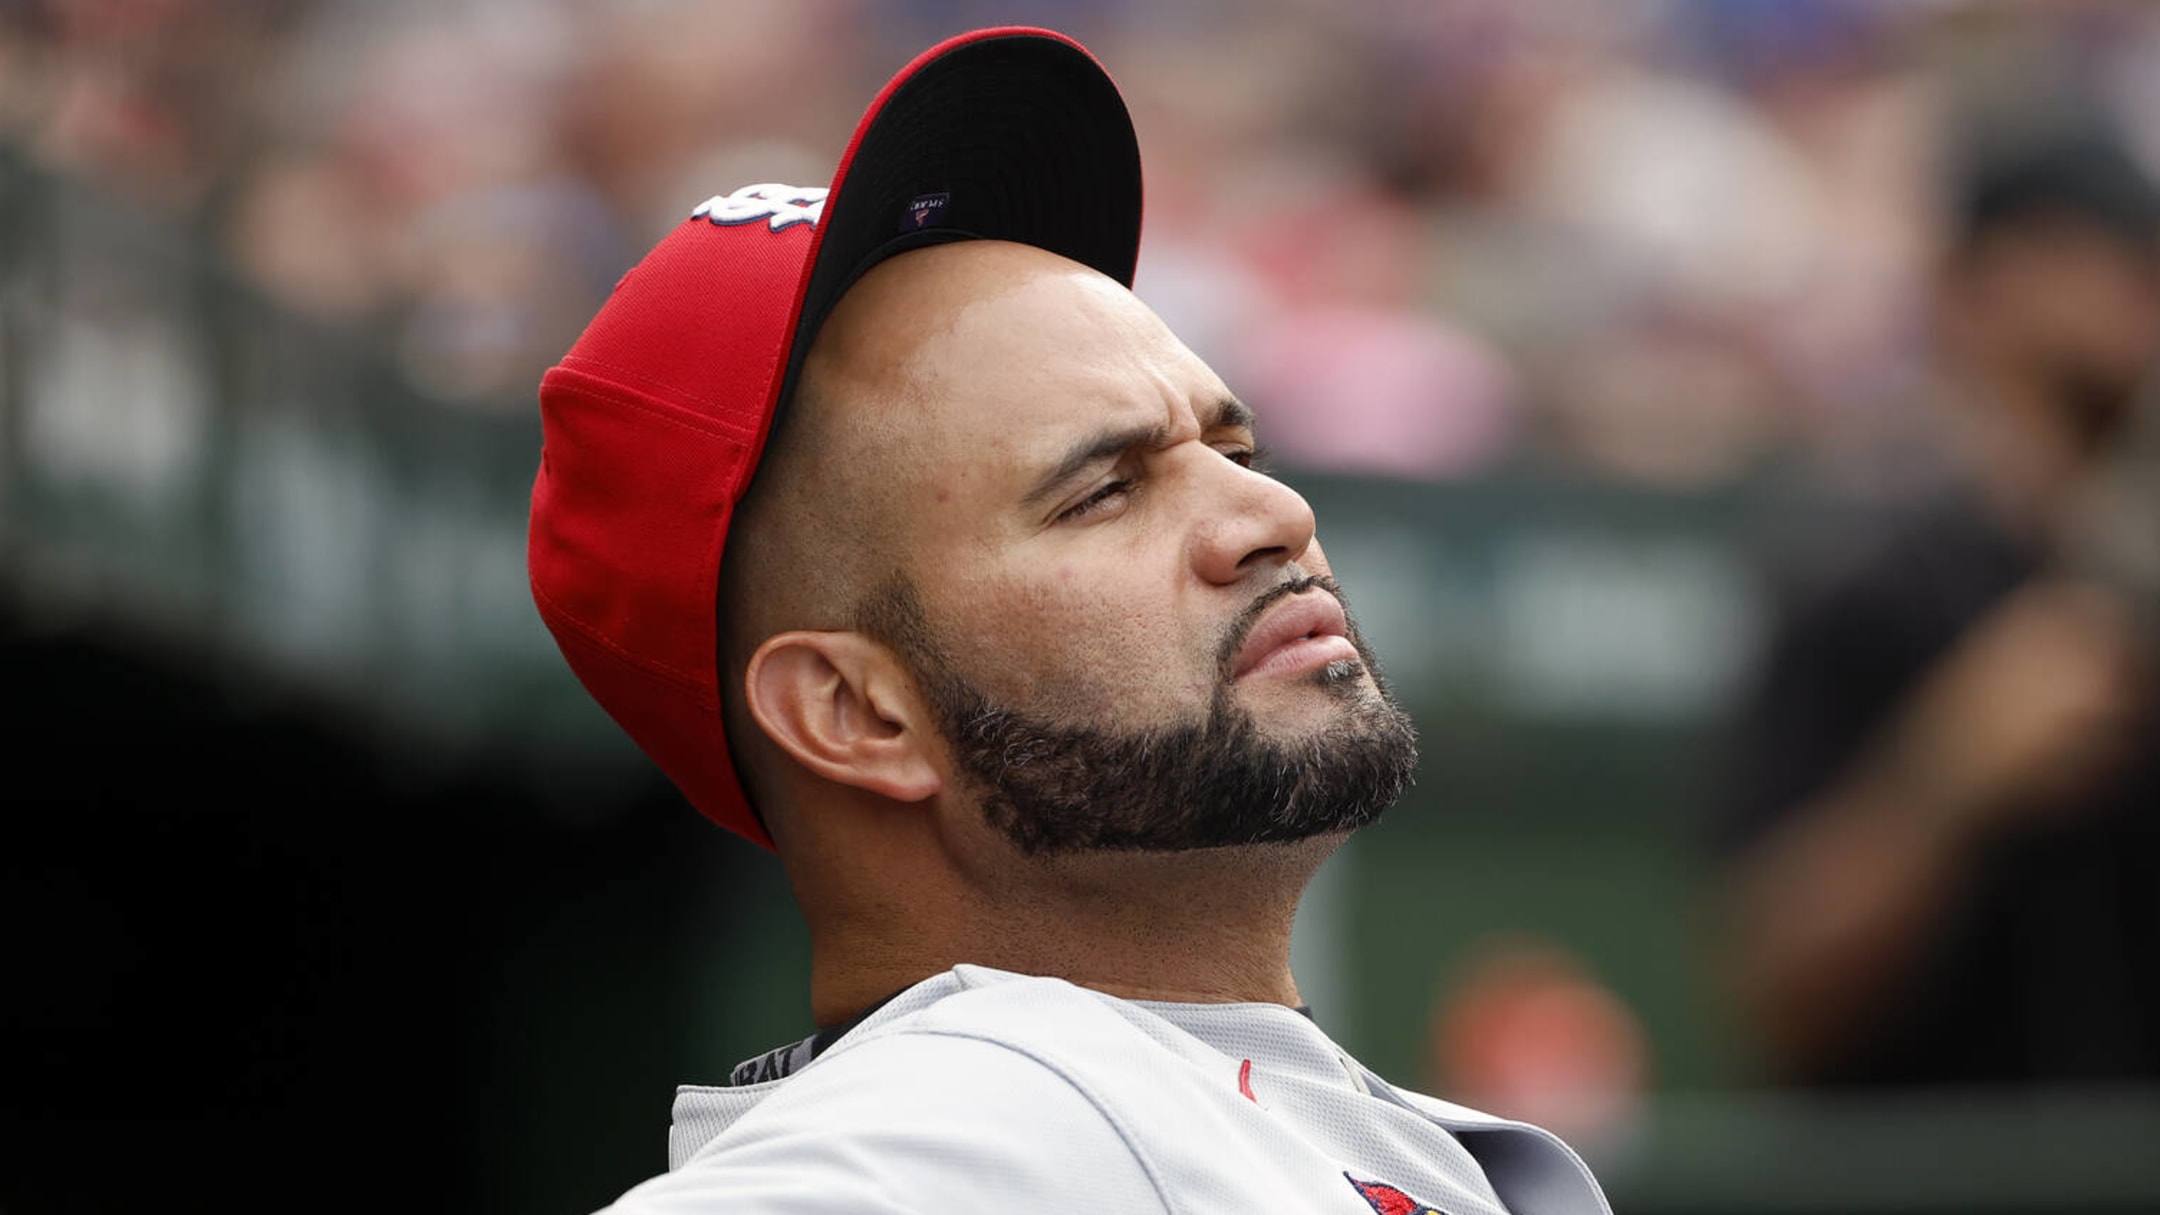 SportsCenter - St. Louis Cardinals star Albert Pujols said he thought about  retiring in June this season. Instead, he'll finish his career as one of  four players in MLB history with over